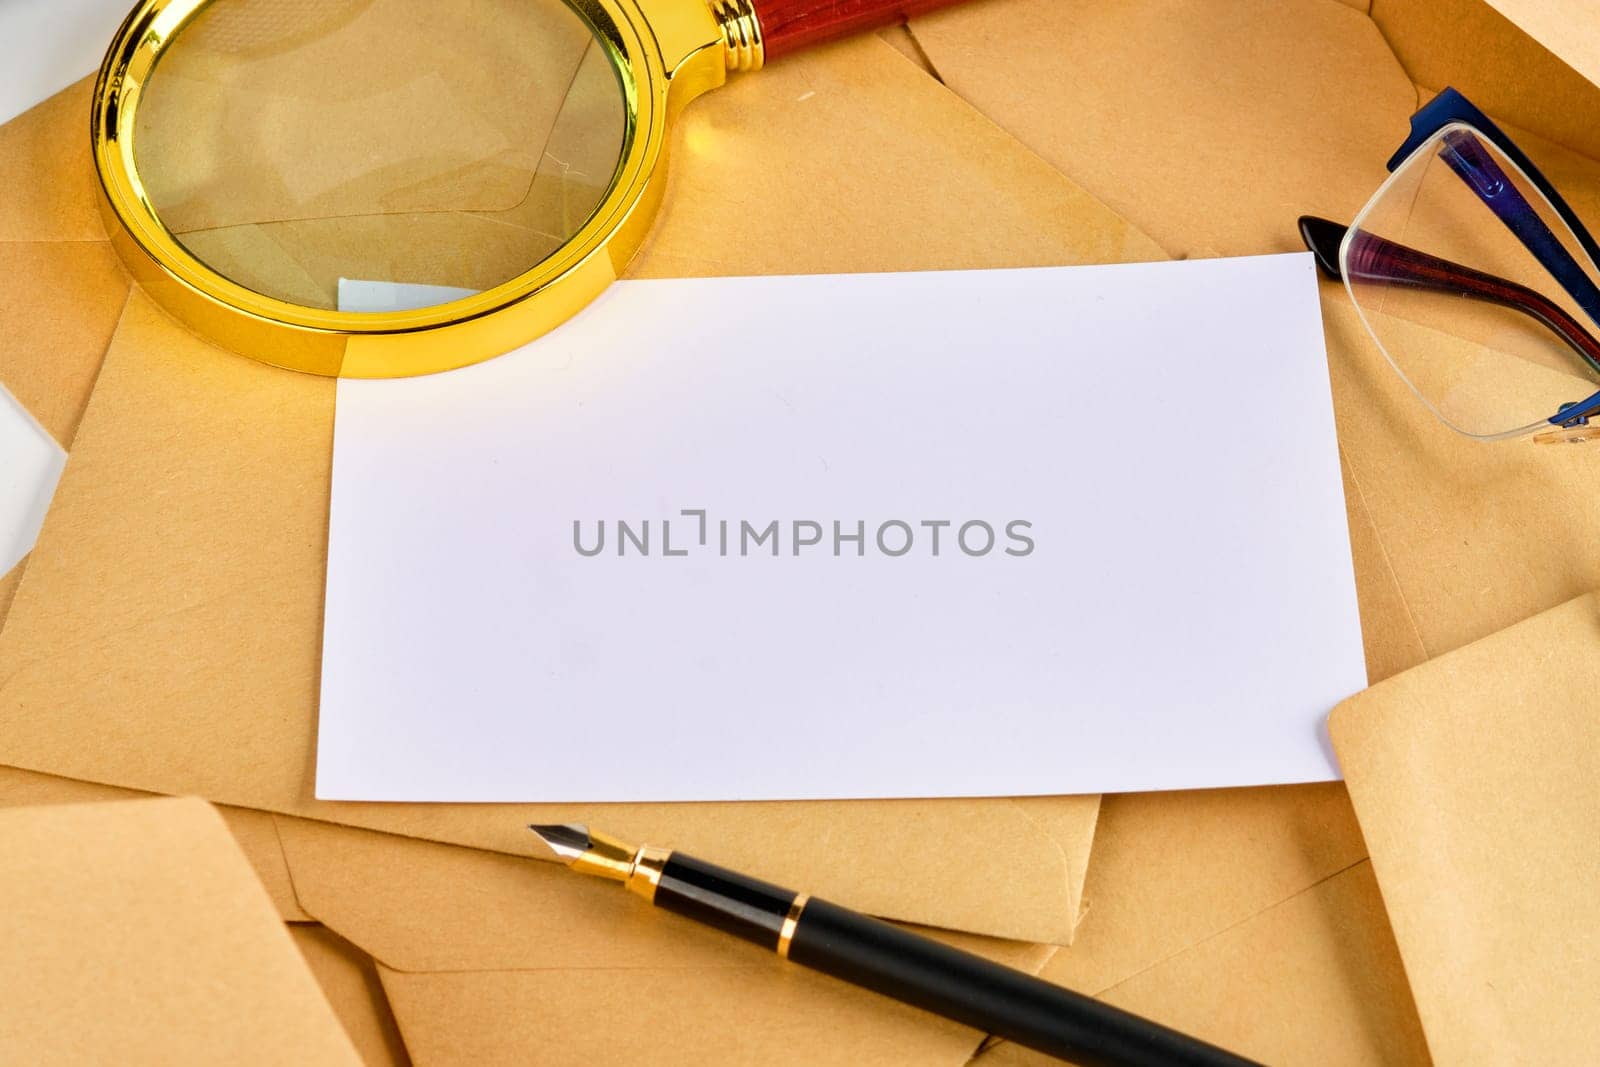 A blank sheet on the envelopes next to a pen, glasses and a magnifying glass